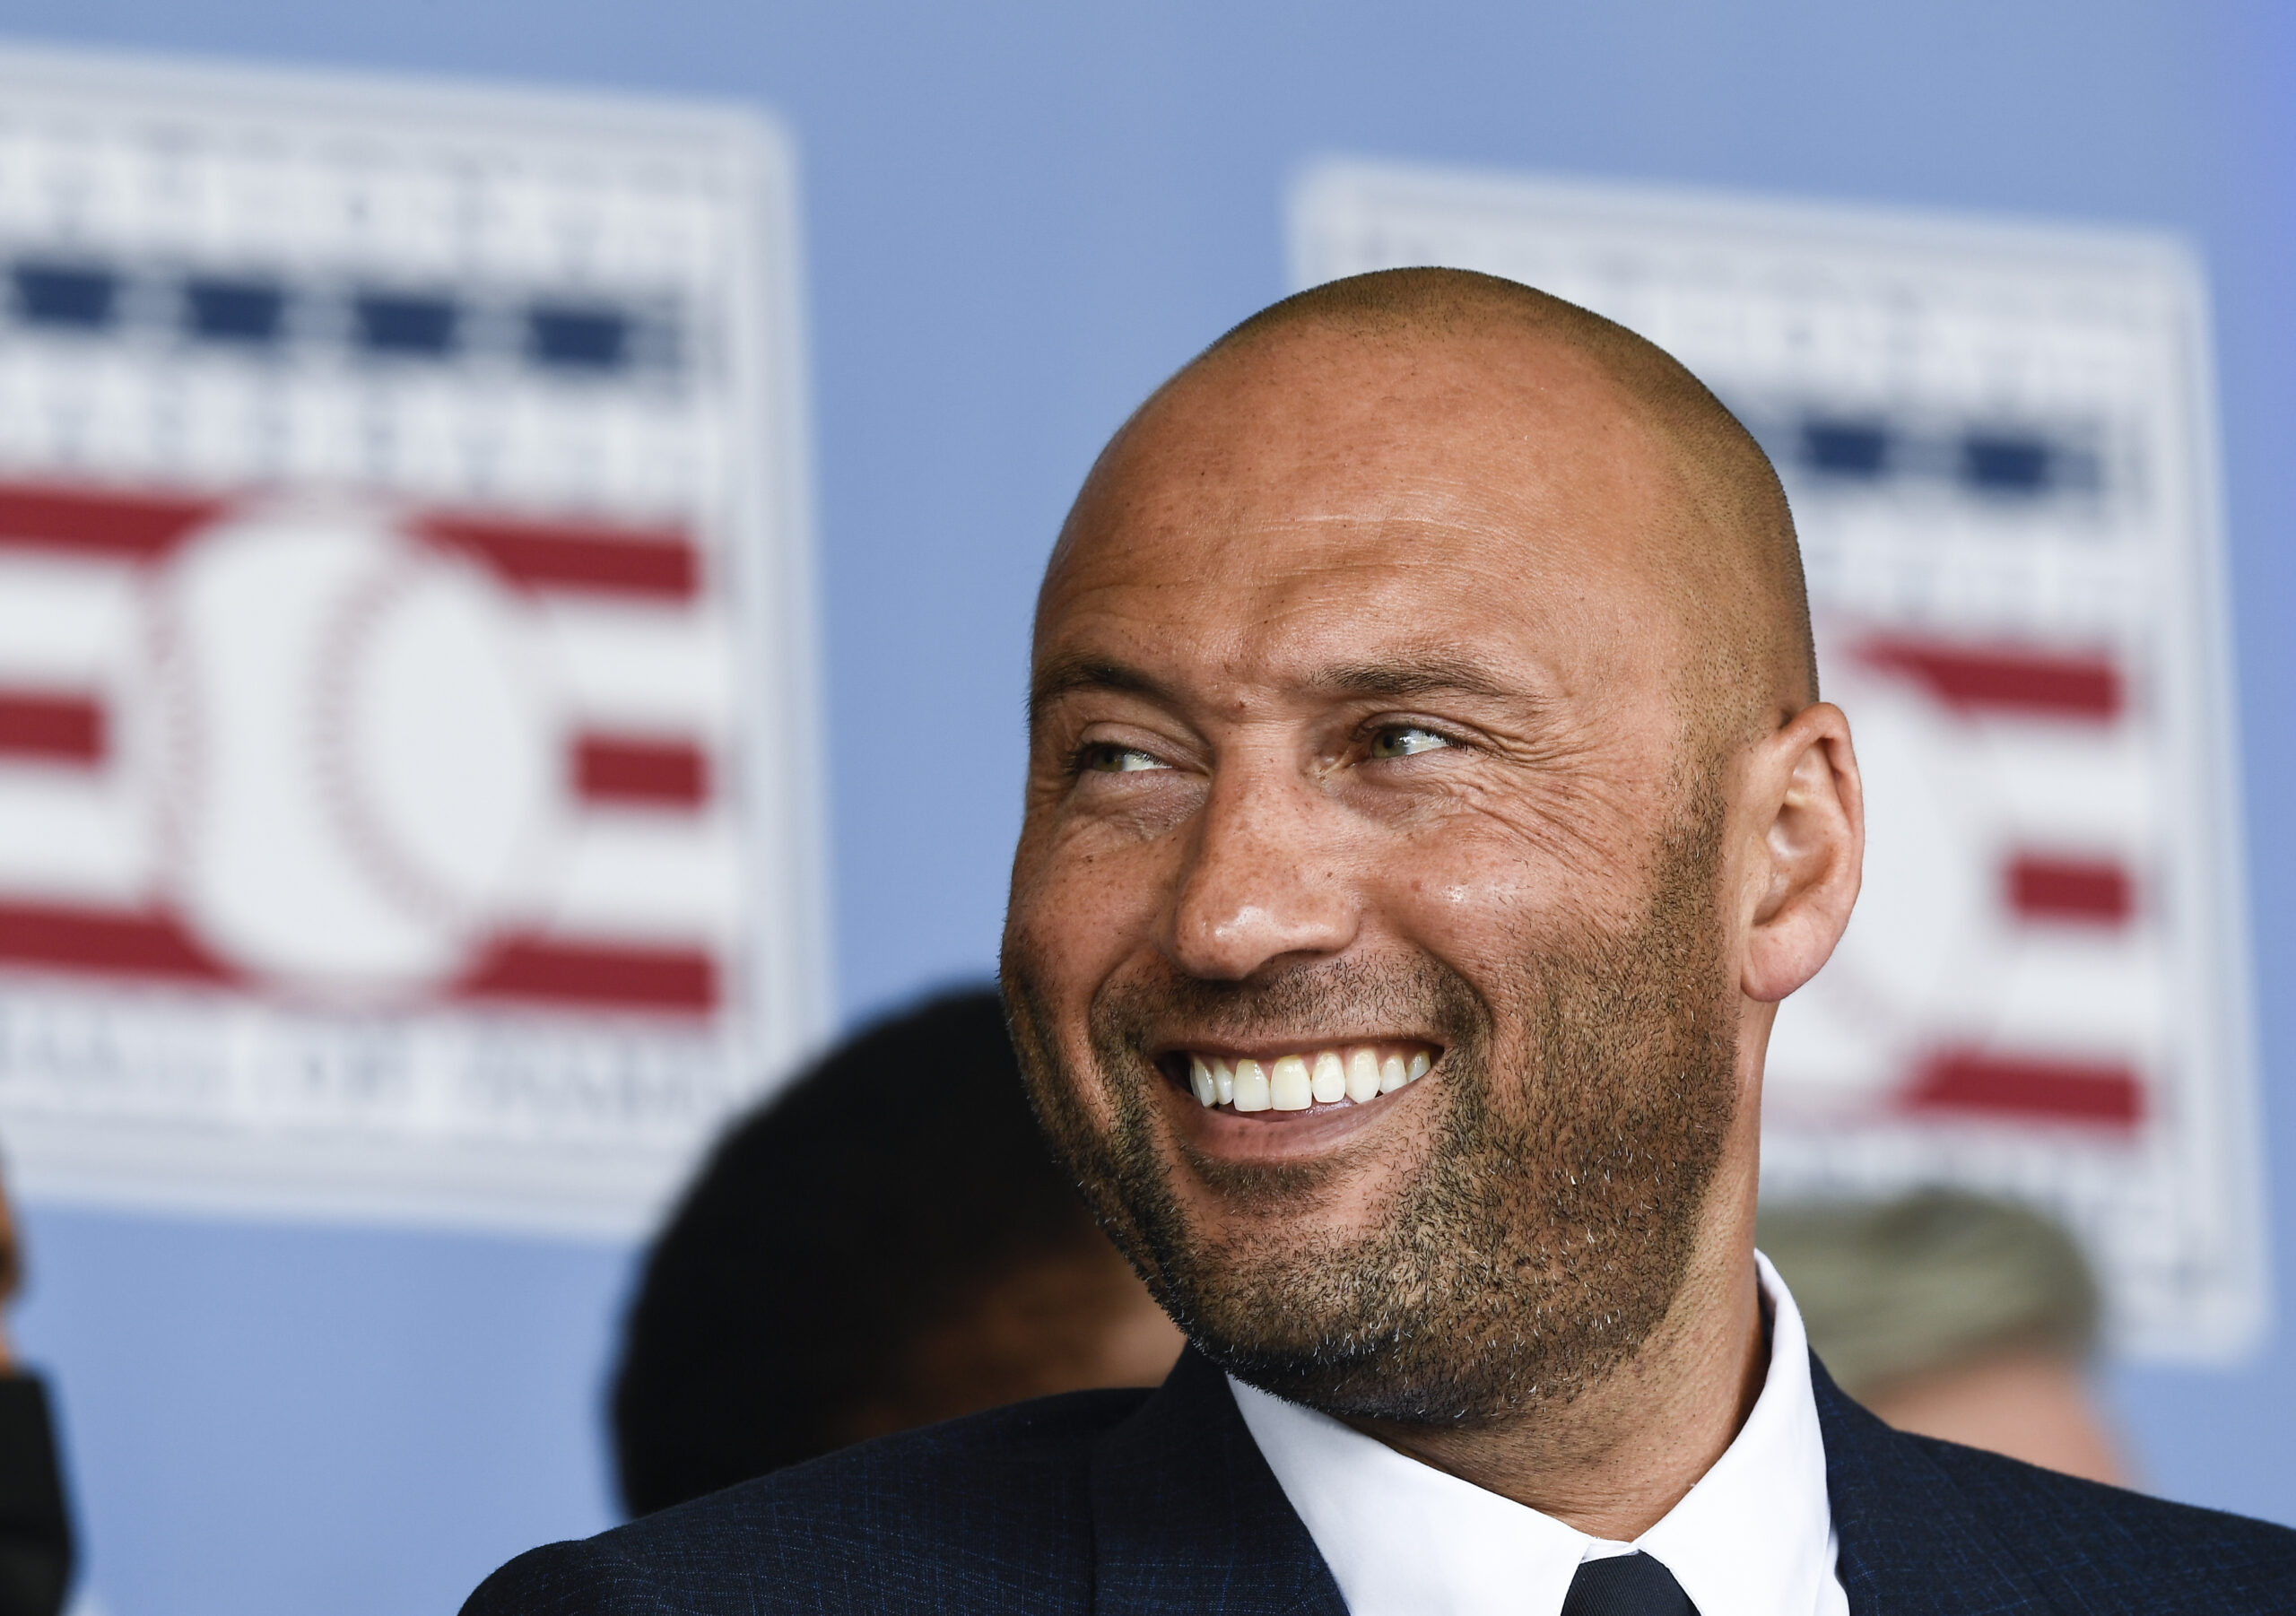 Hall of Fame inductee Derek Jeter, of the New York Yankees, watches a video during an induction ceremony at the Clark Sports Center at the National Baseball Hall of Fame, Wednesday, Sept. 8, 2021, in Cooperstown, N.Y. (AP Photo/Hans Pennink)